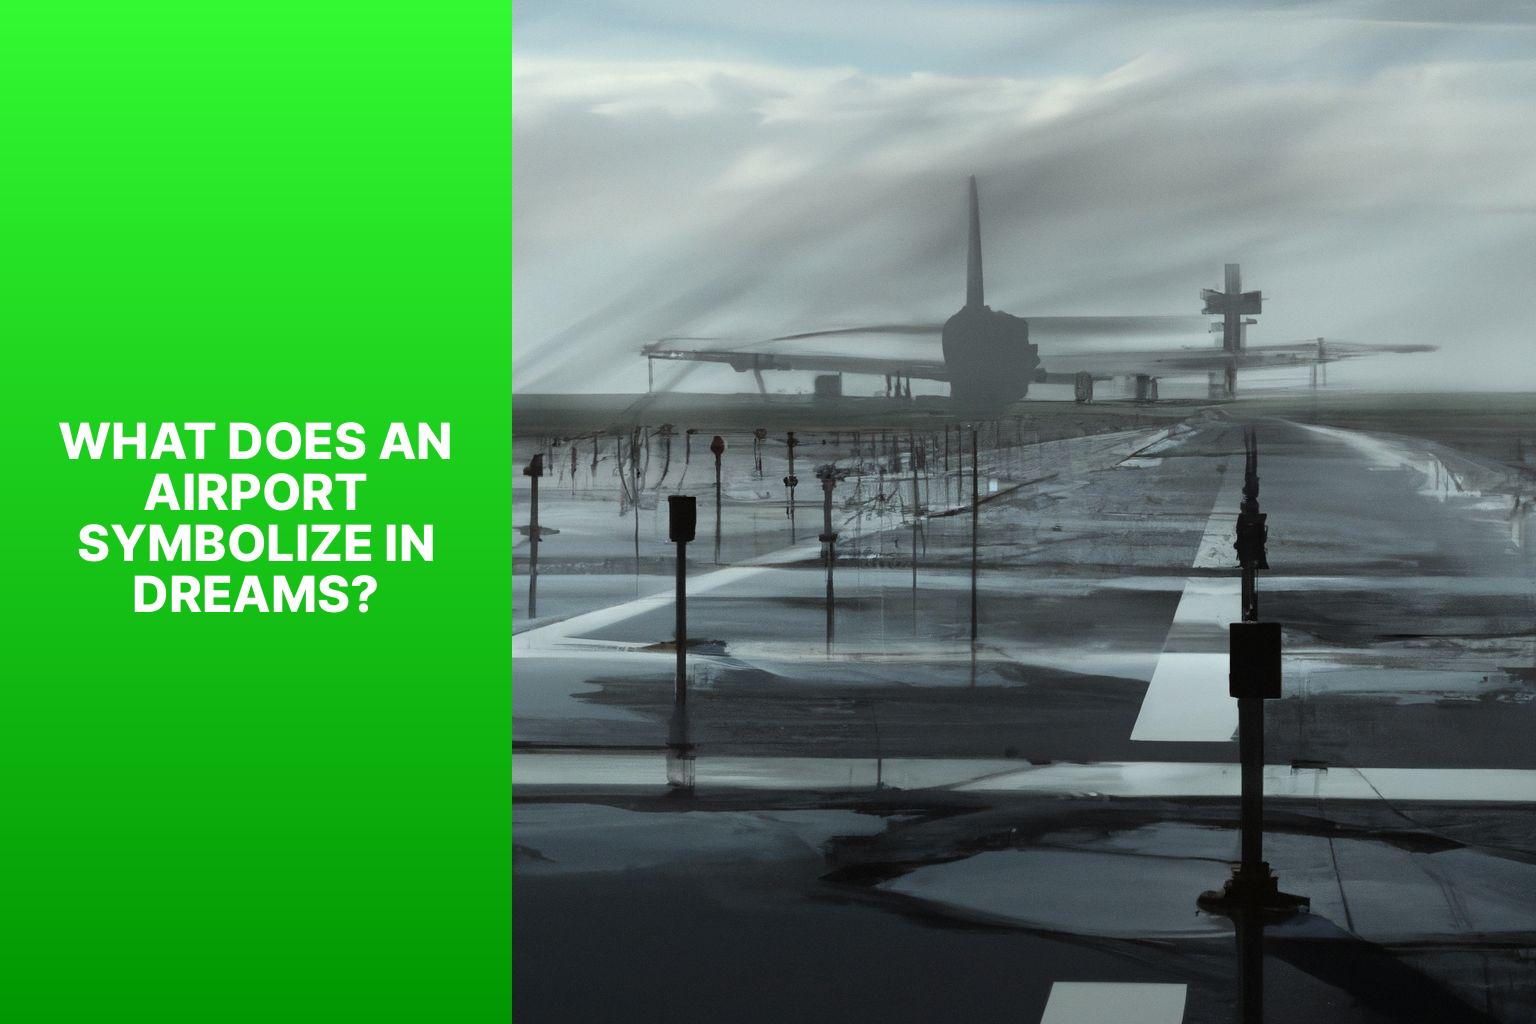 What Does an Airport Symbolize in Dreams? - airport dream meaning 